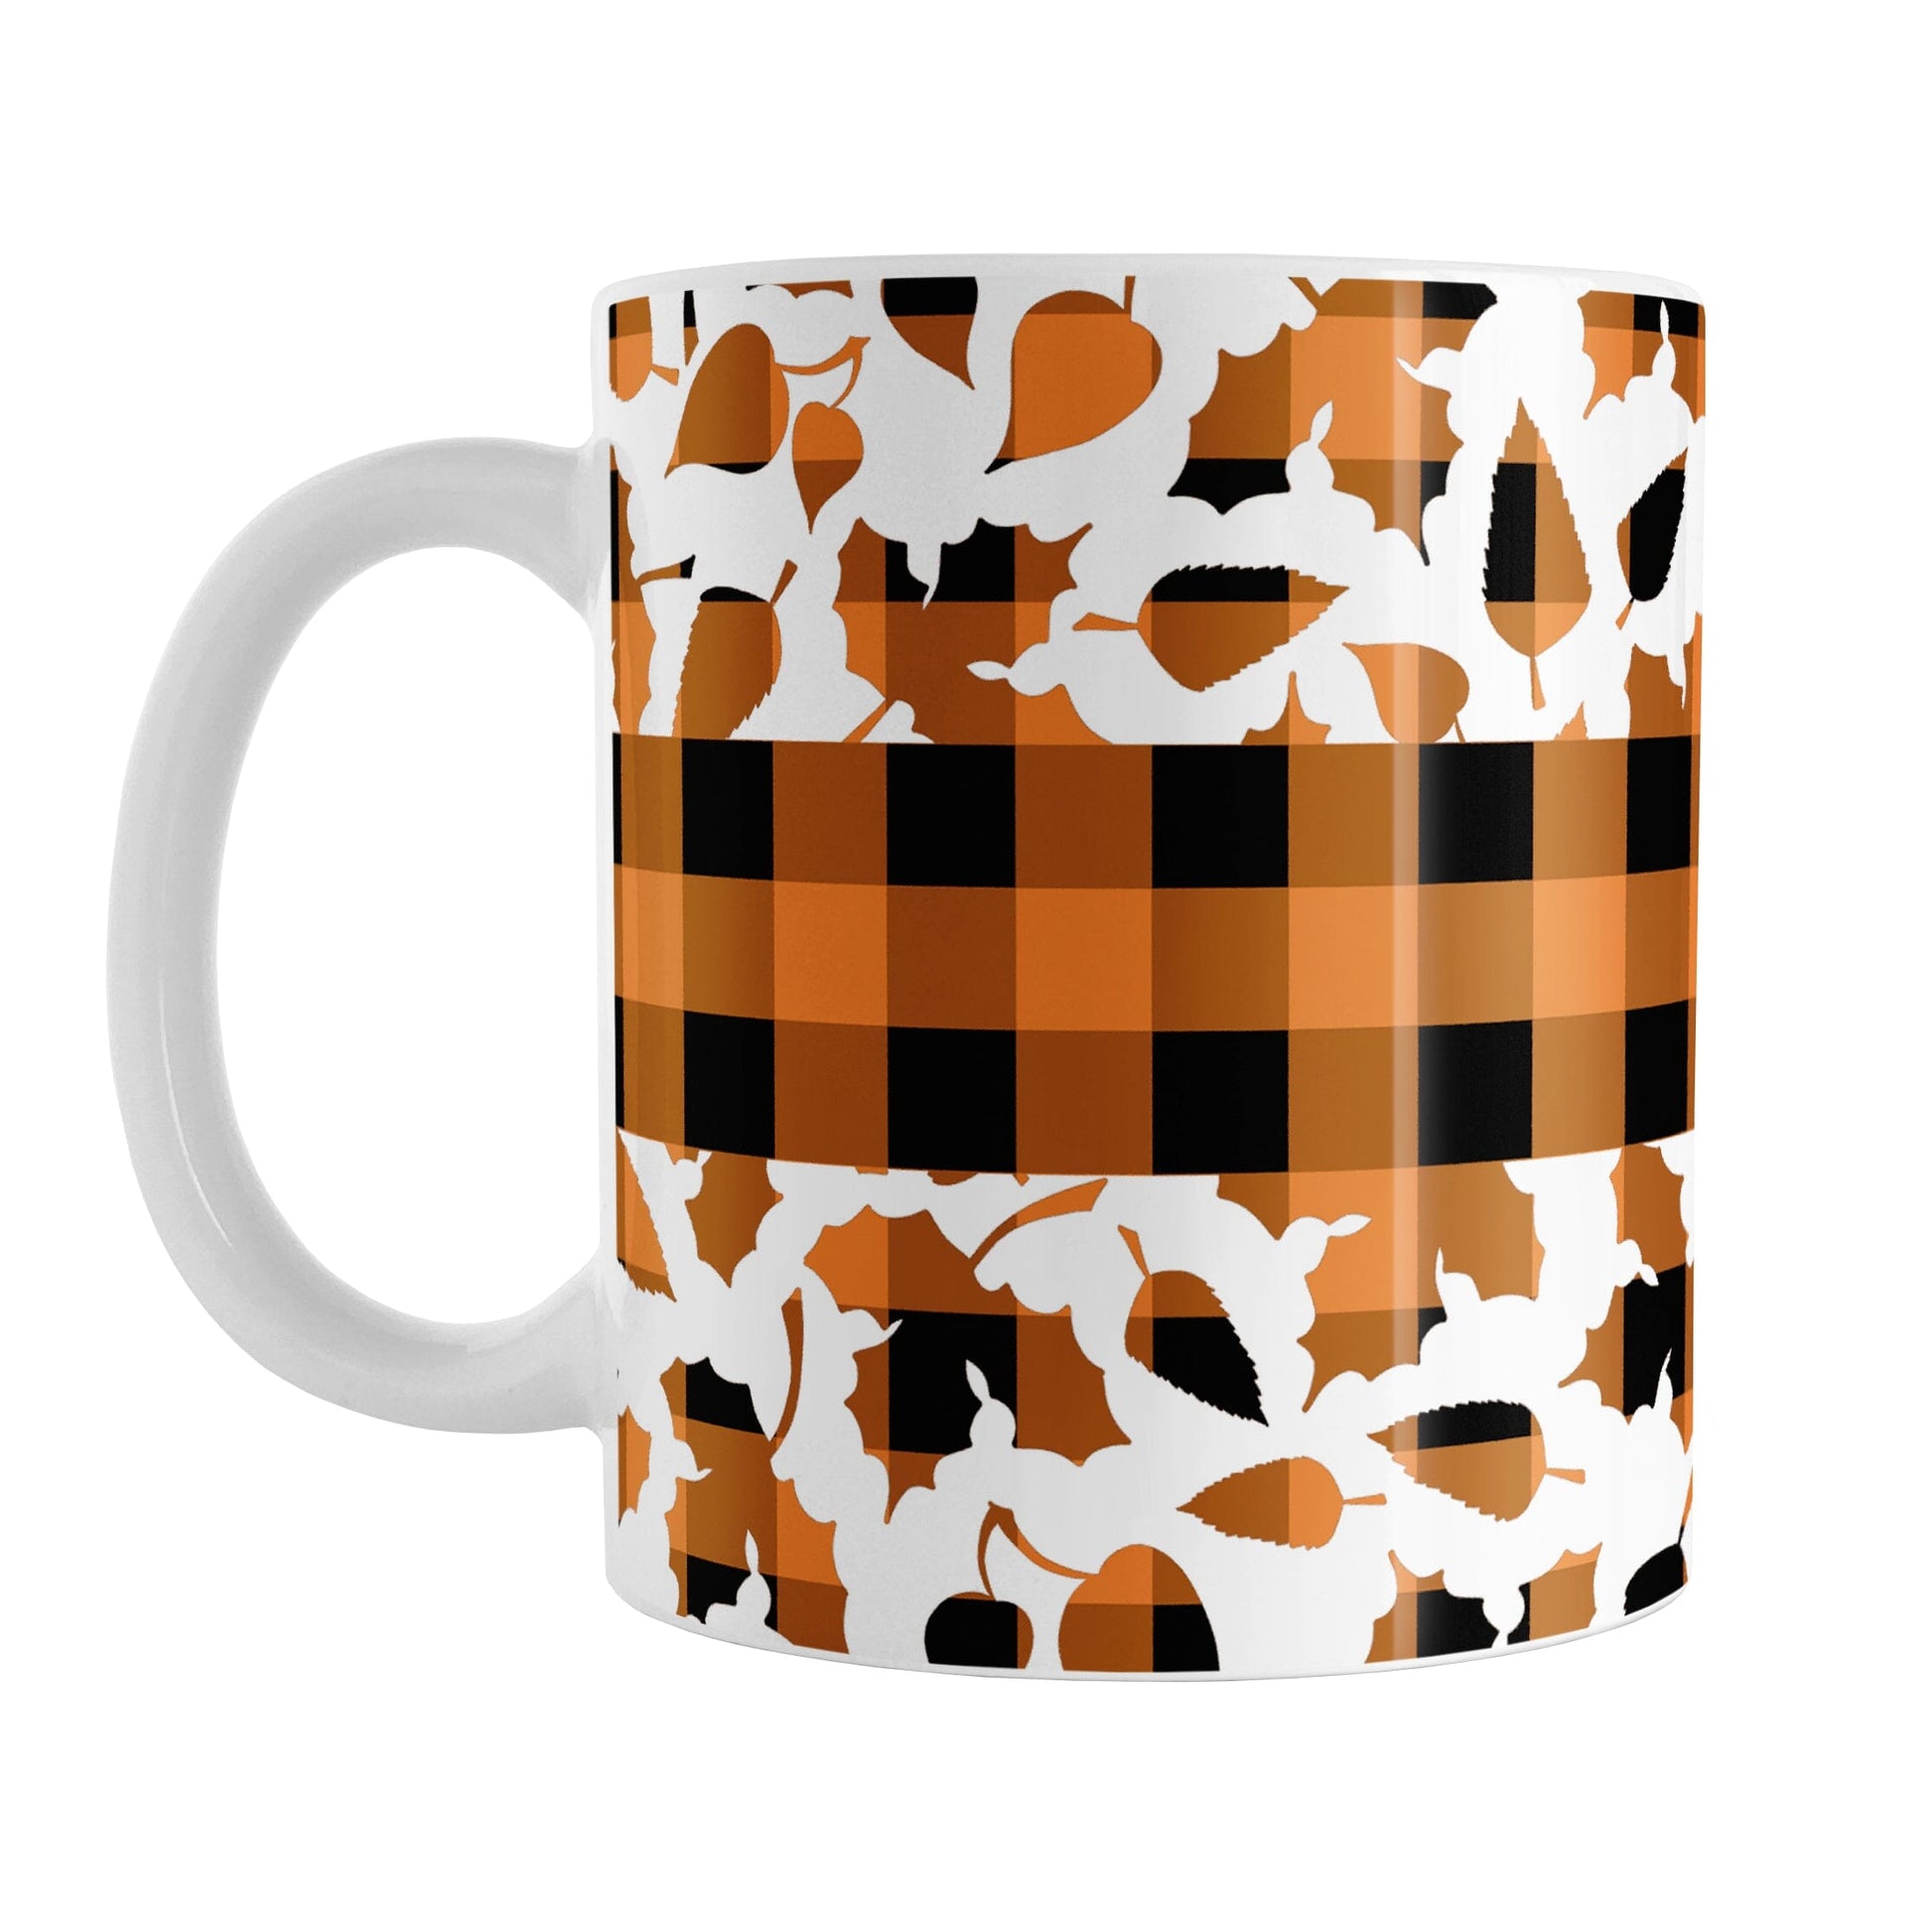 Orange Buffalo Plaid Leaves Fall Mug (11oz) at Amy's Coffee Mugs. A ceramic coffee mug designed with a pattern of leaves with an orange and black buffalo plaid pattern and a buffalo plaid stripe across the center over the leaves. This design wraps around the mug to the handle.